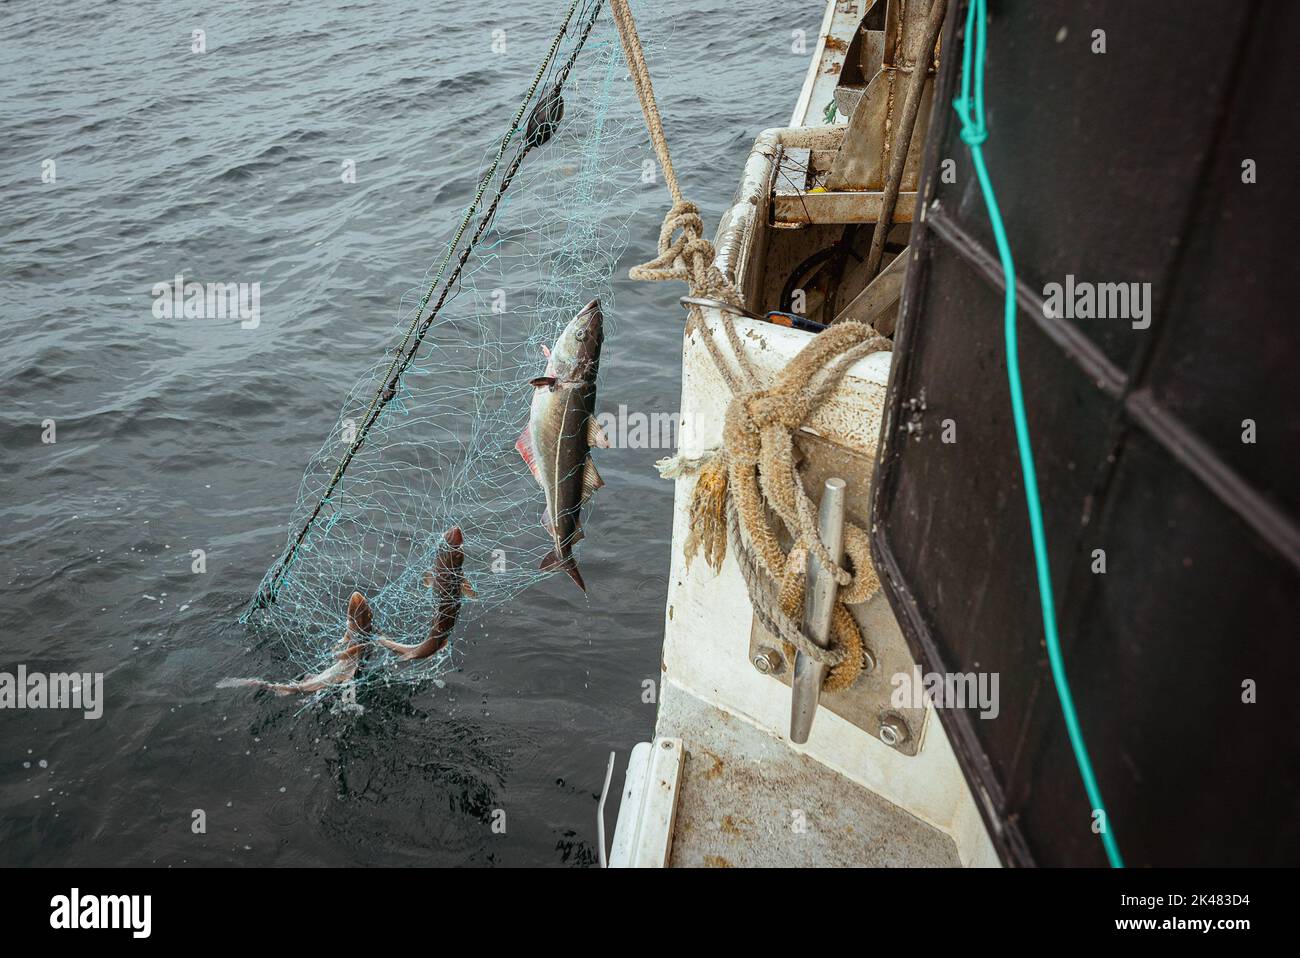 Portland, Maine, USA. 27th Sep, 2022. Three pollock fish caught in a gillnet  fishing net being hoisted on board a commercial fishing boat off the coast  of Maine A board a gillnet